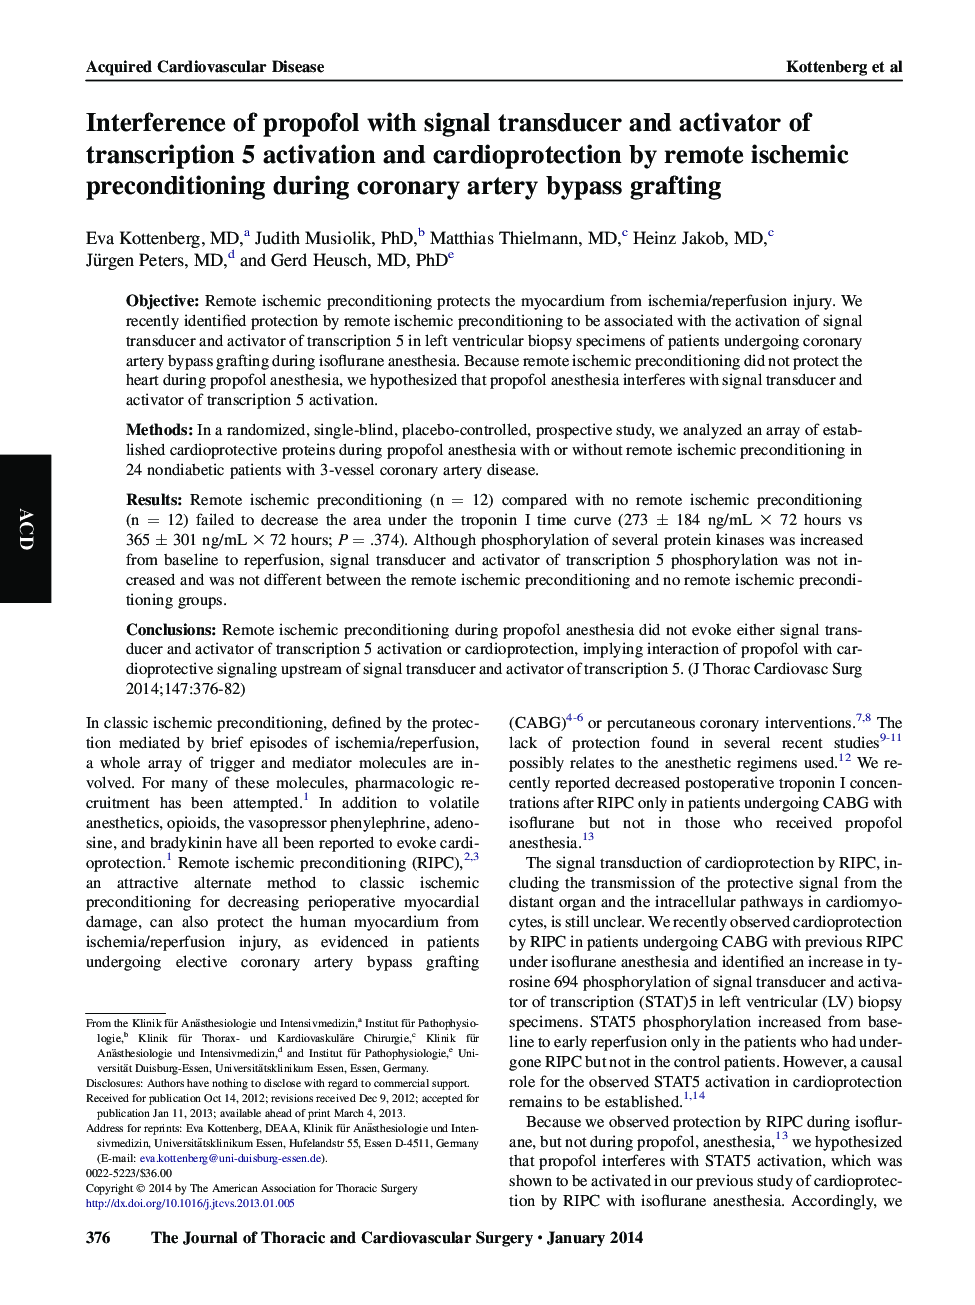 Interference of propofol with signal transducer and activator of transcription 5 activation and cardioprotection by remote ischemic preconditioning during coronary artery bypass grafting 